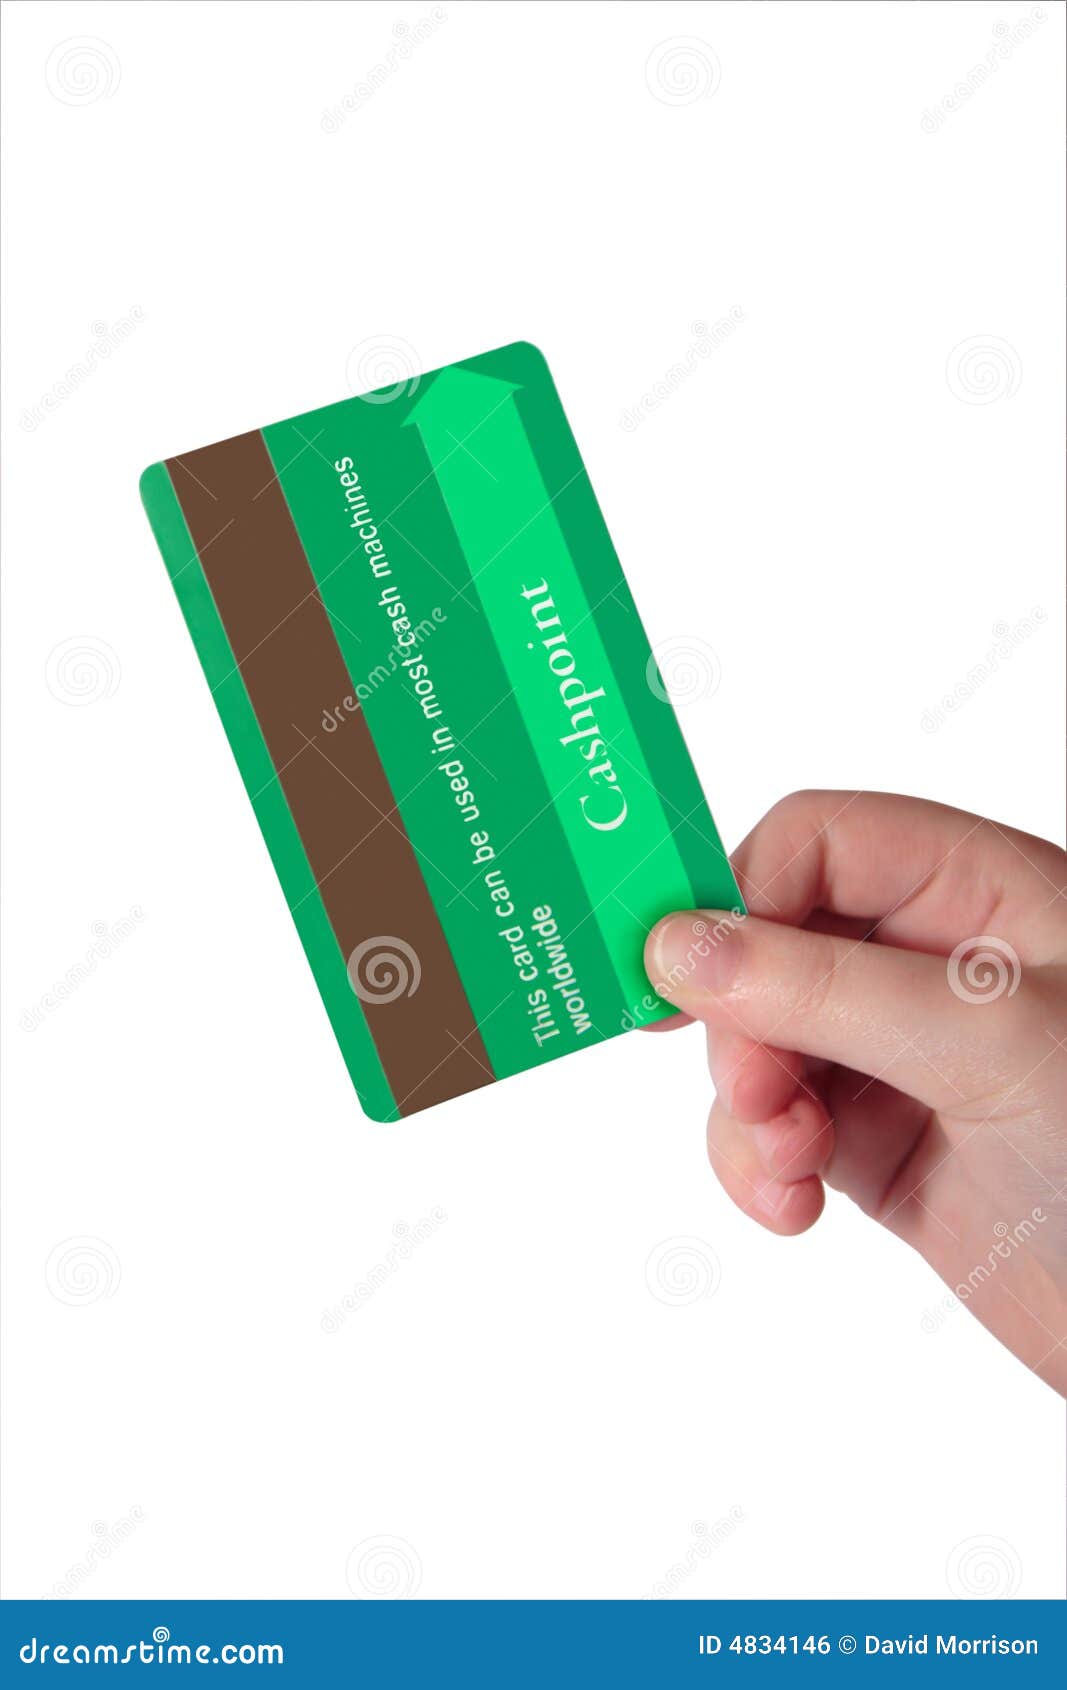 fake-green-credit-card-3-picture-image-4834146